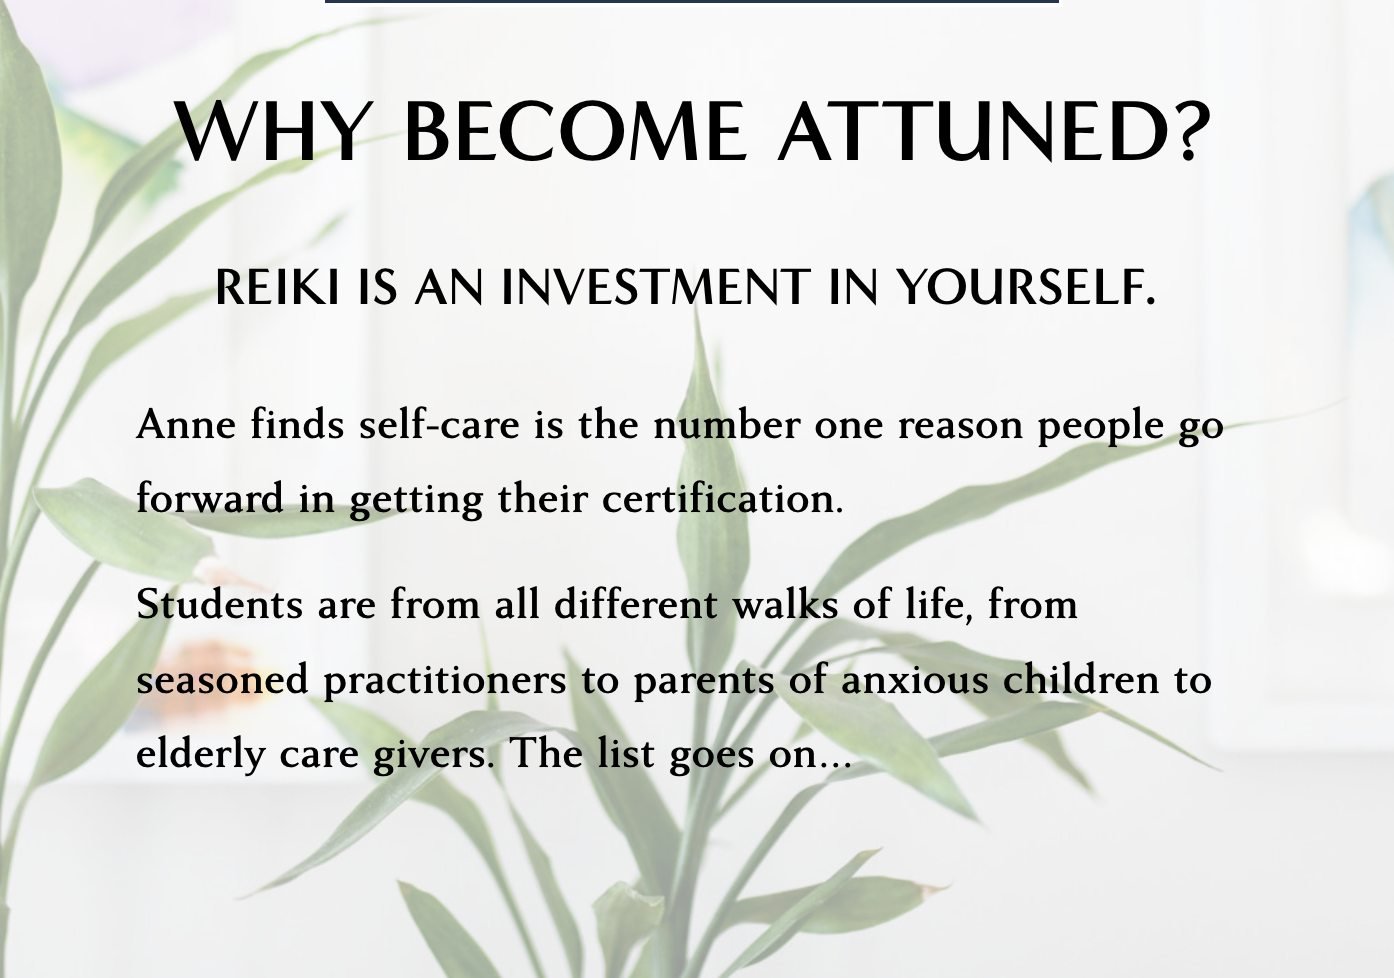 ✨UPDATE 

 Reiki 1 Certification Thursday April 25, 2024 1 Spot Left! 
⬇️Click below to register
https://shorturl.at/bgjmx

Sold Out Reiki 2 Certification Friday April 26, 2024
email anne@annedonnell.com  to be added to the waitlist. 

#reikiusui #re